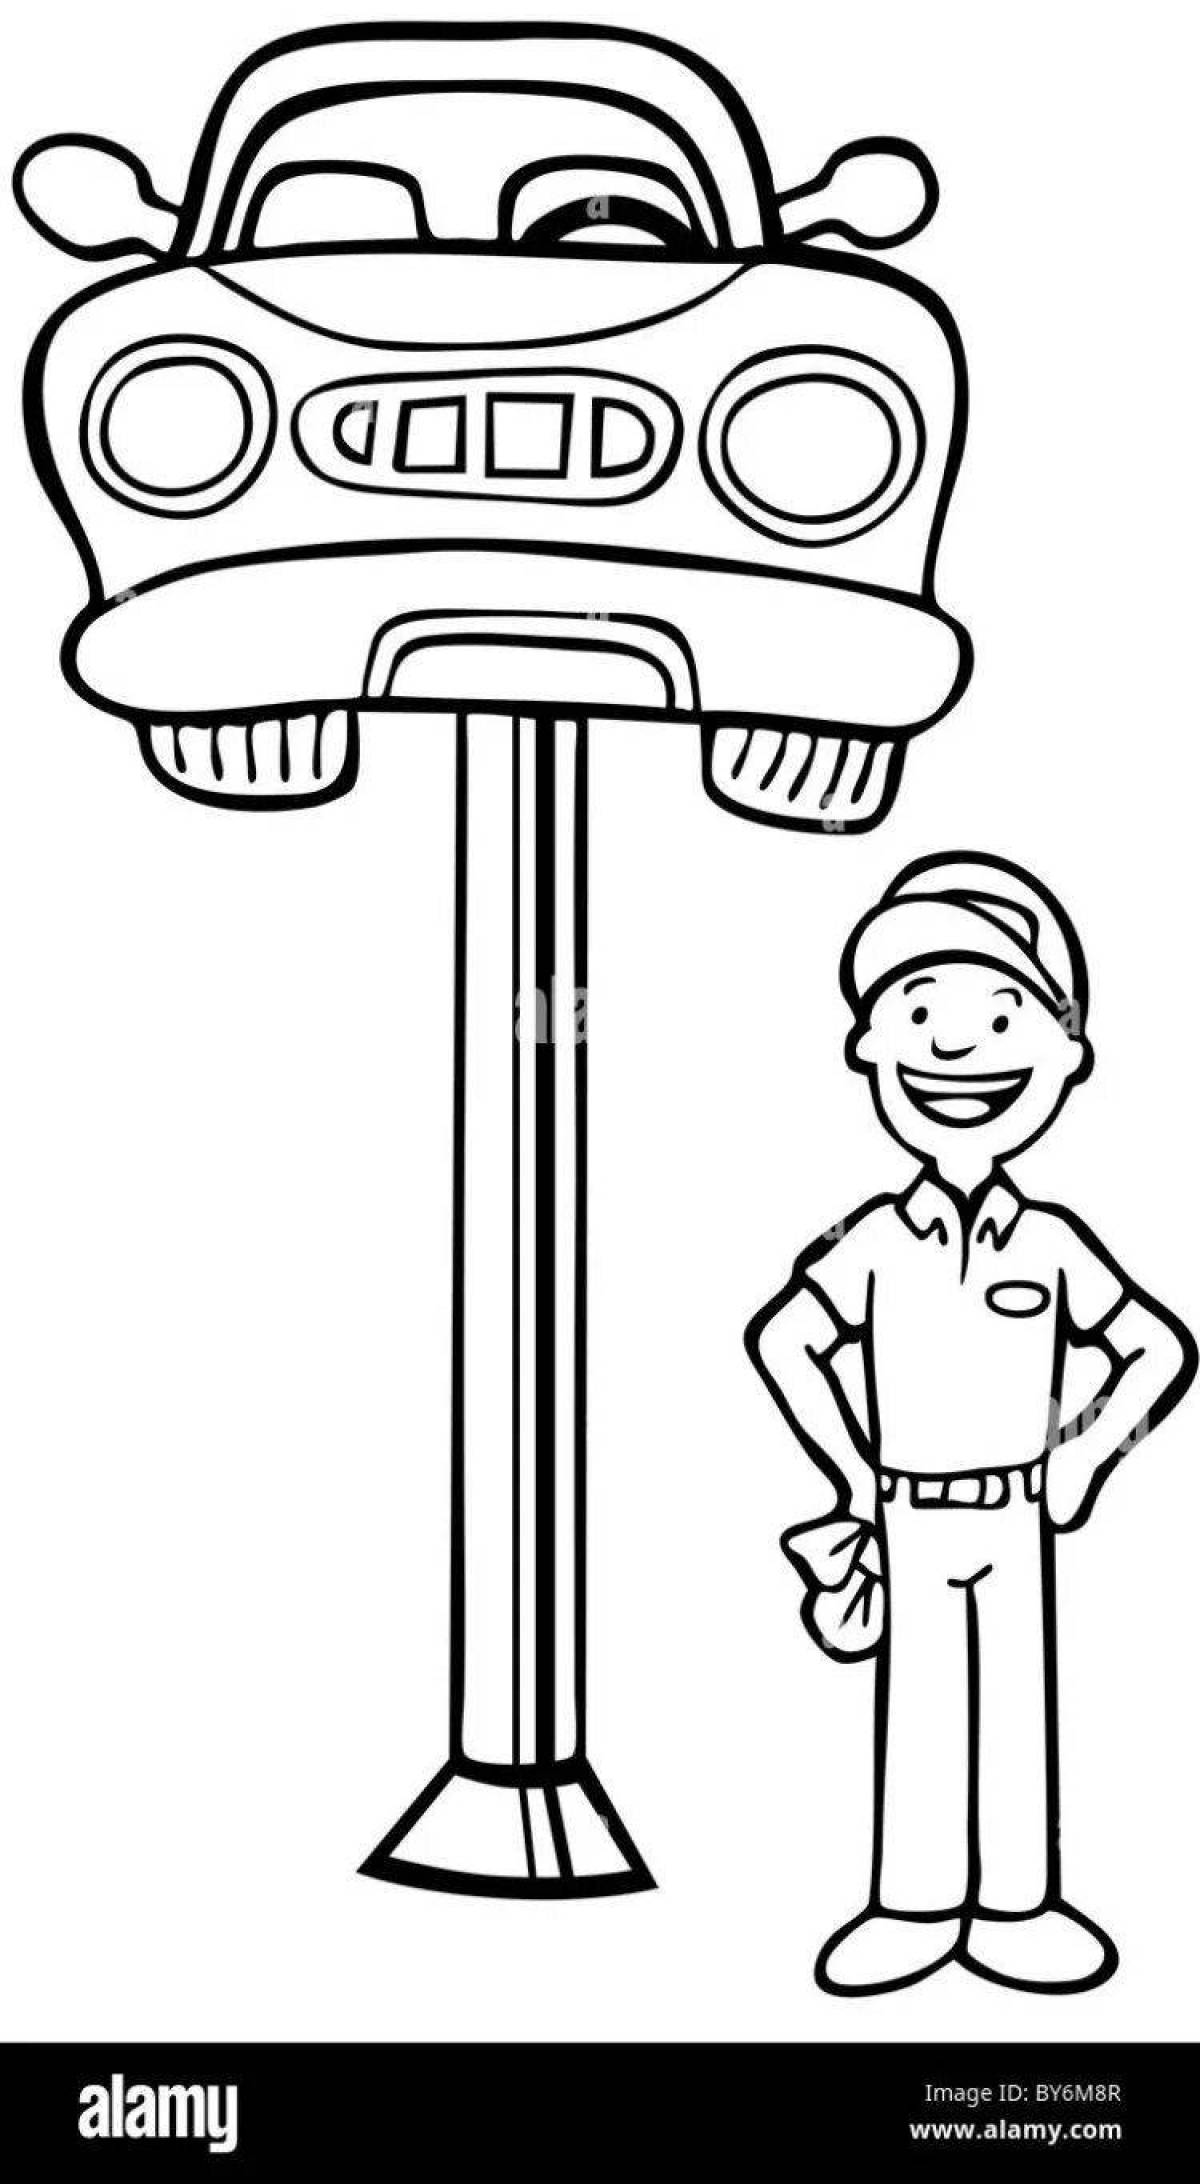 Adorable car mechanic coloring page for kids